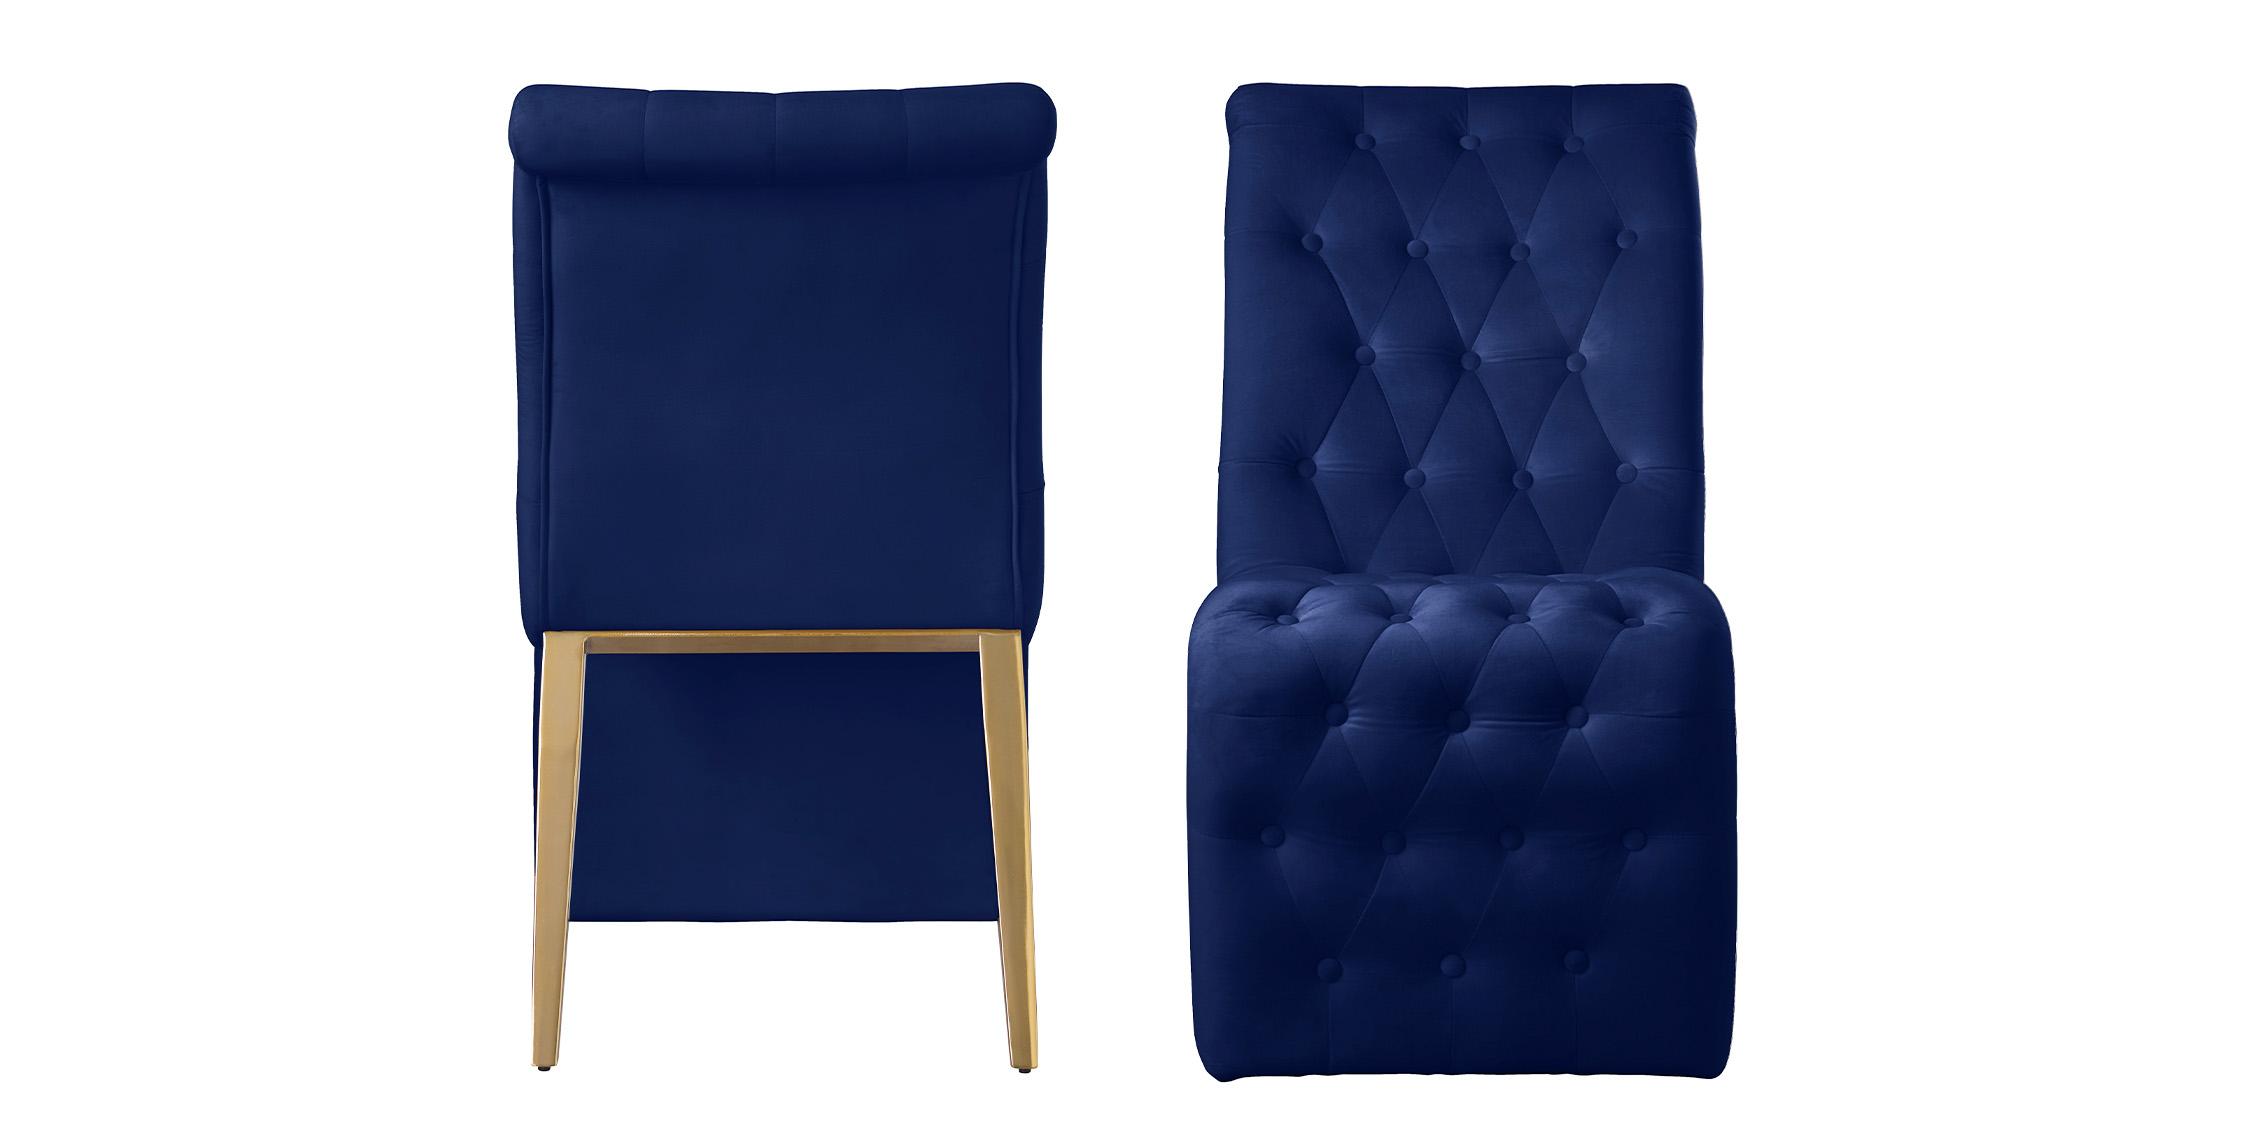 

    
Meridian Furniture CURVE 920Navy-C Dining Chair Set Navy/Gold 920Navy-C
